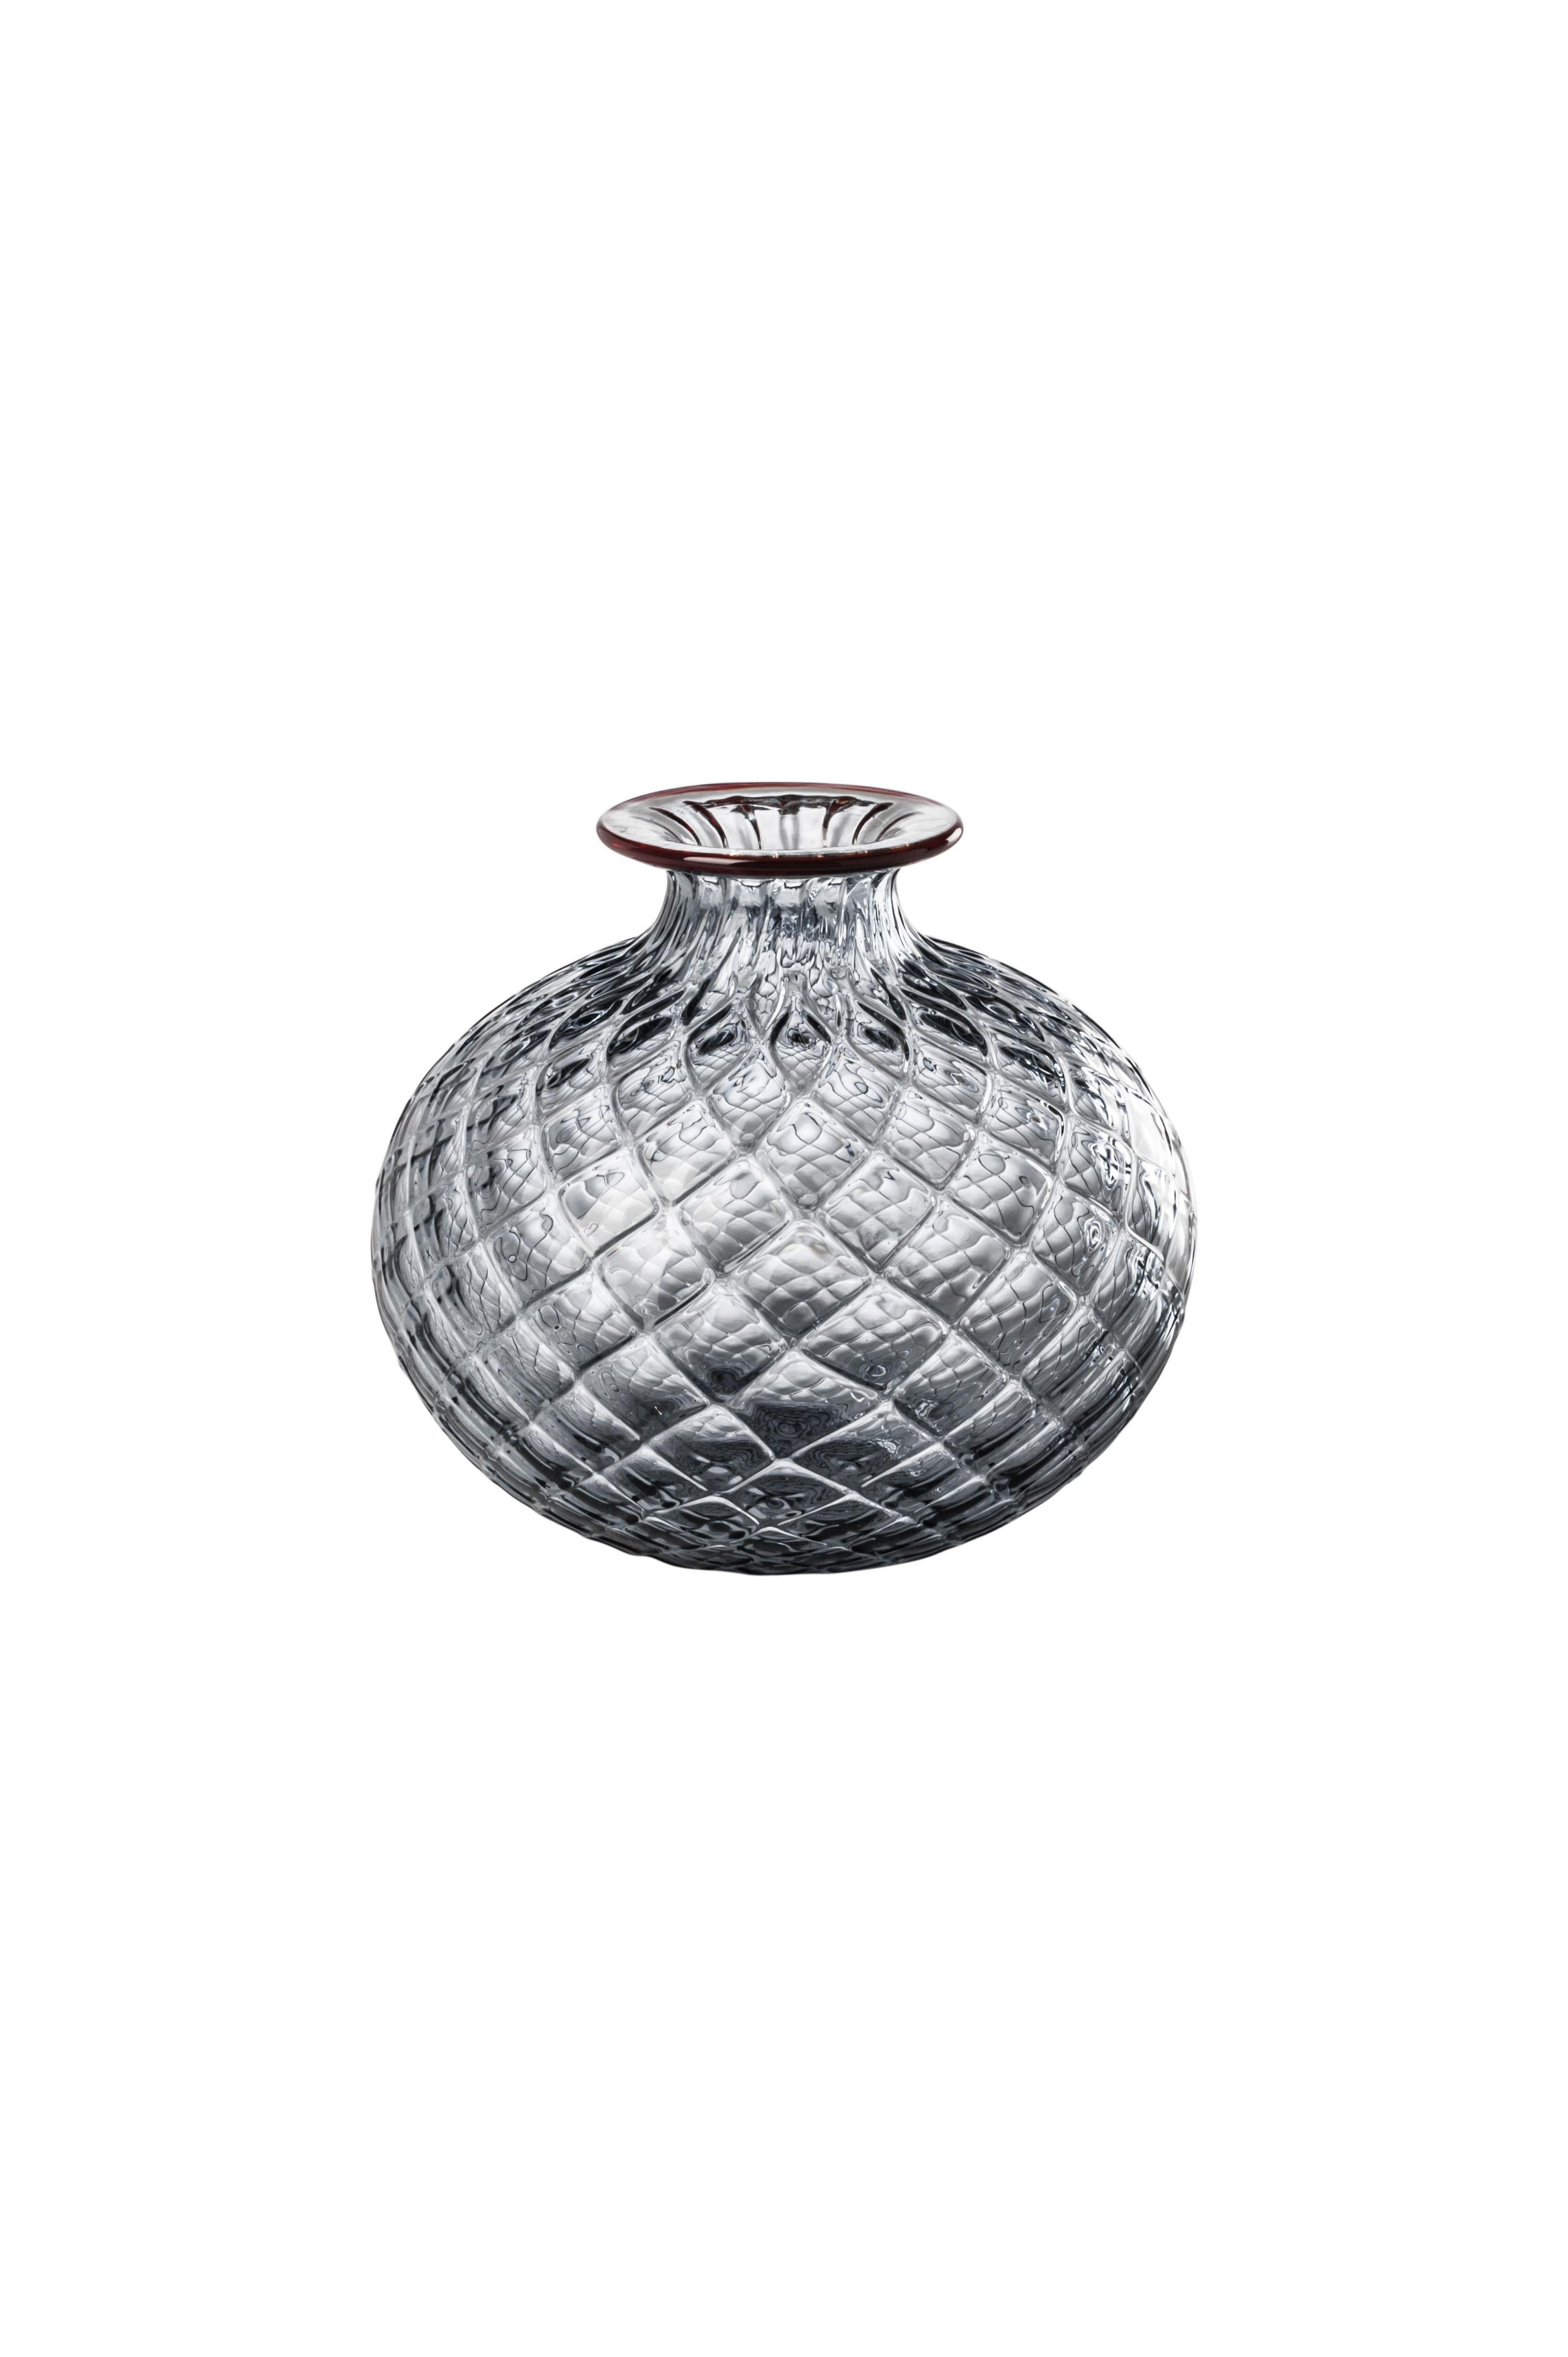 Venini glass vase with full body and textured surface with hexagonal shaped pattern in red designed in 1970. Perfect for indoor home decor as container or strong statement piece for any room. Also available in other colors on 1stdibs.

Dimensions: